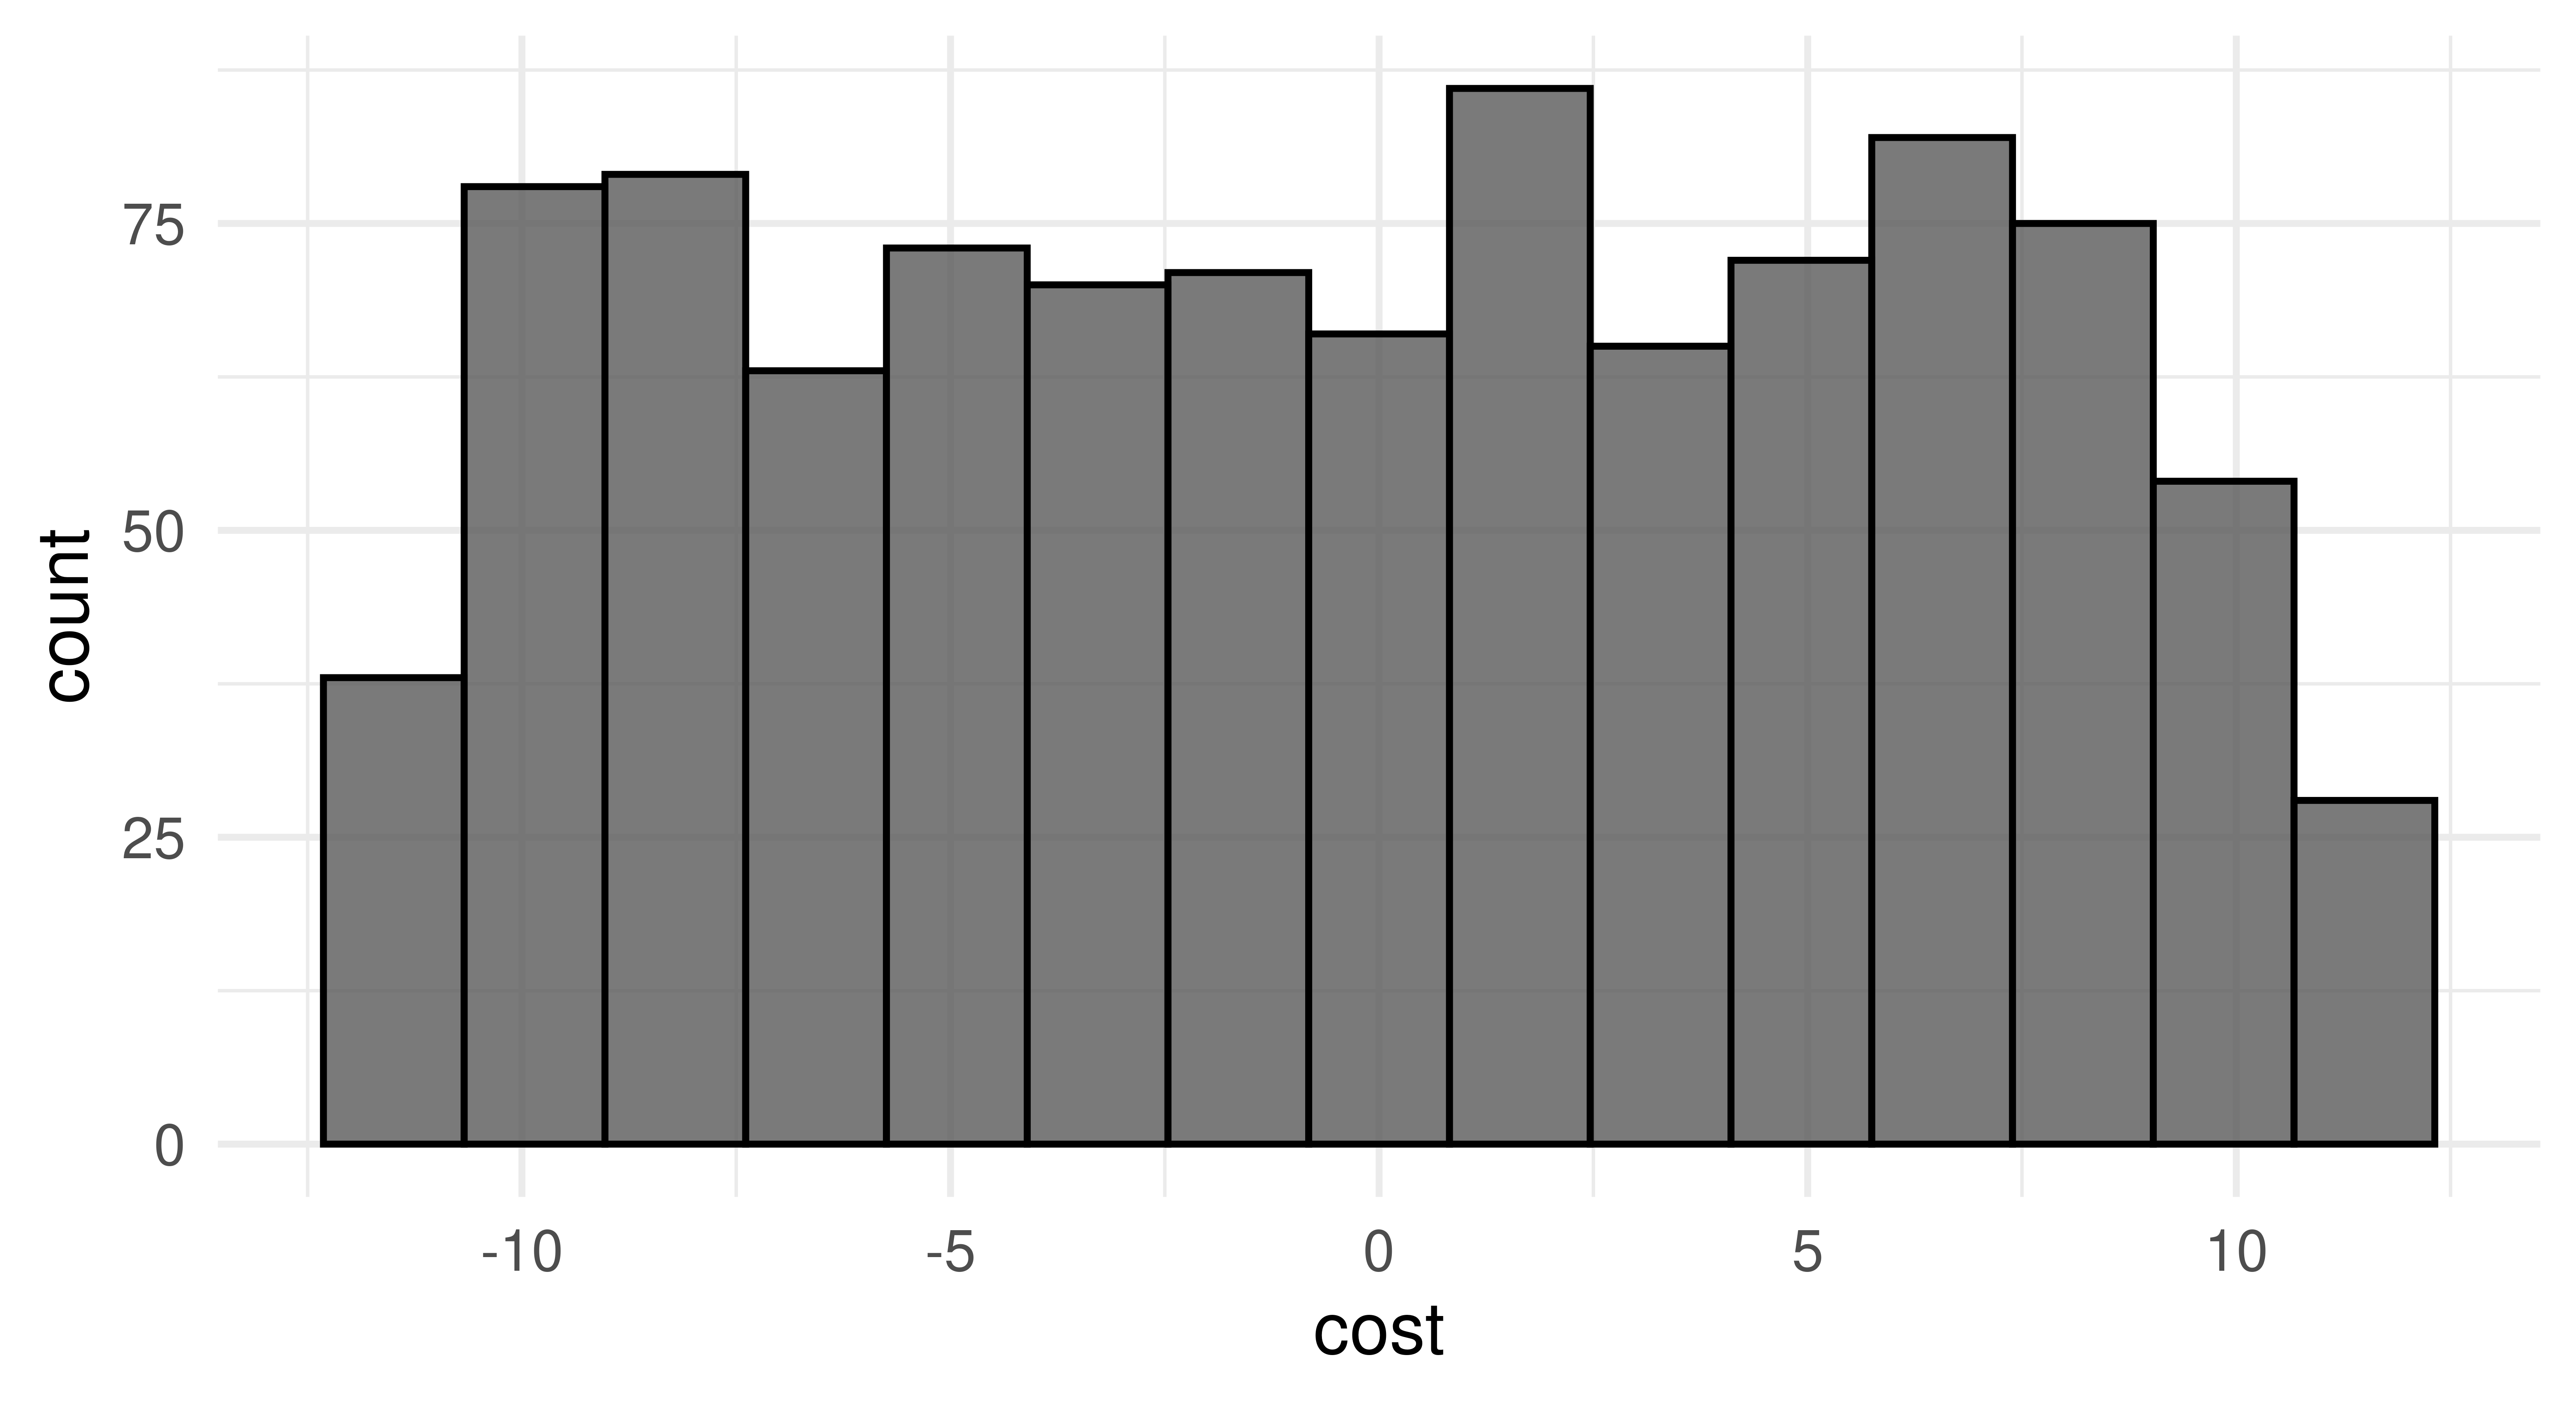 Left plot shows the values on the linear scale sampled by the tuner between [-11.5,11.5] with roughly equal length bars. Right plot shows values between [1e-5, 1e5] with the vast majority close to 0 and very few at other points.